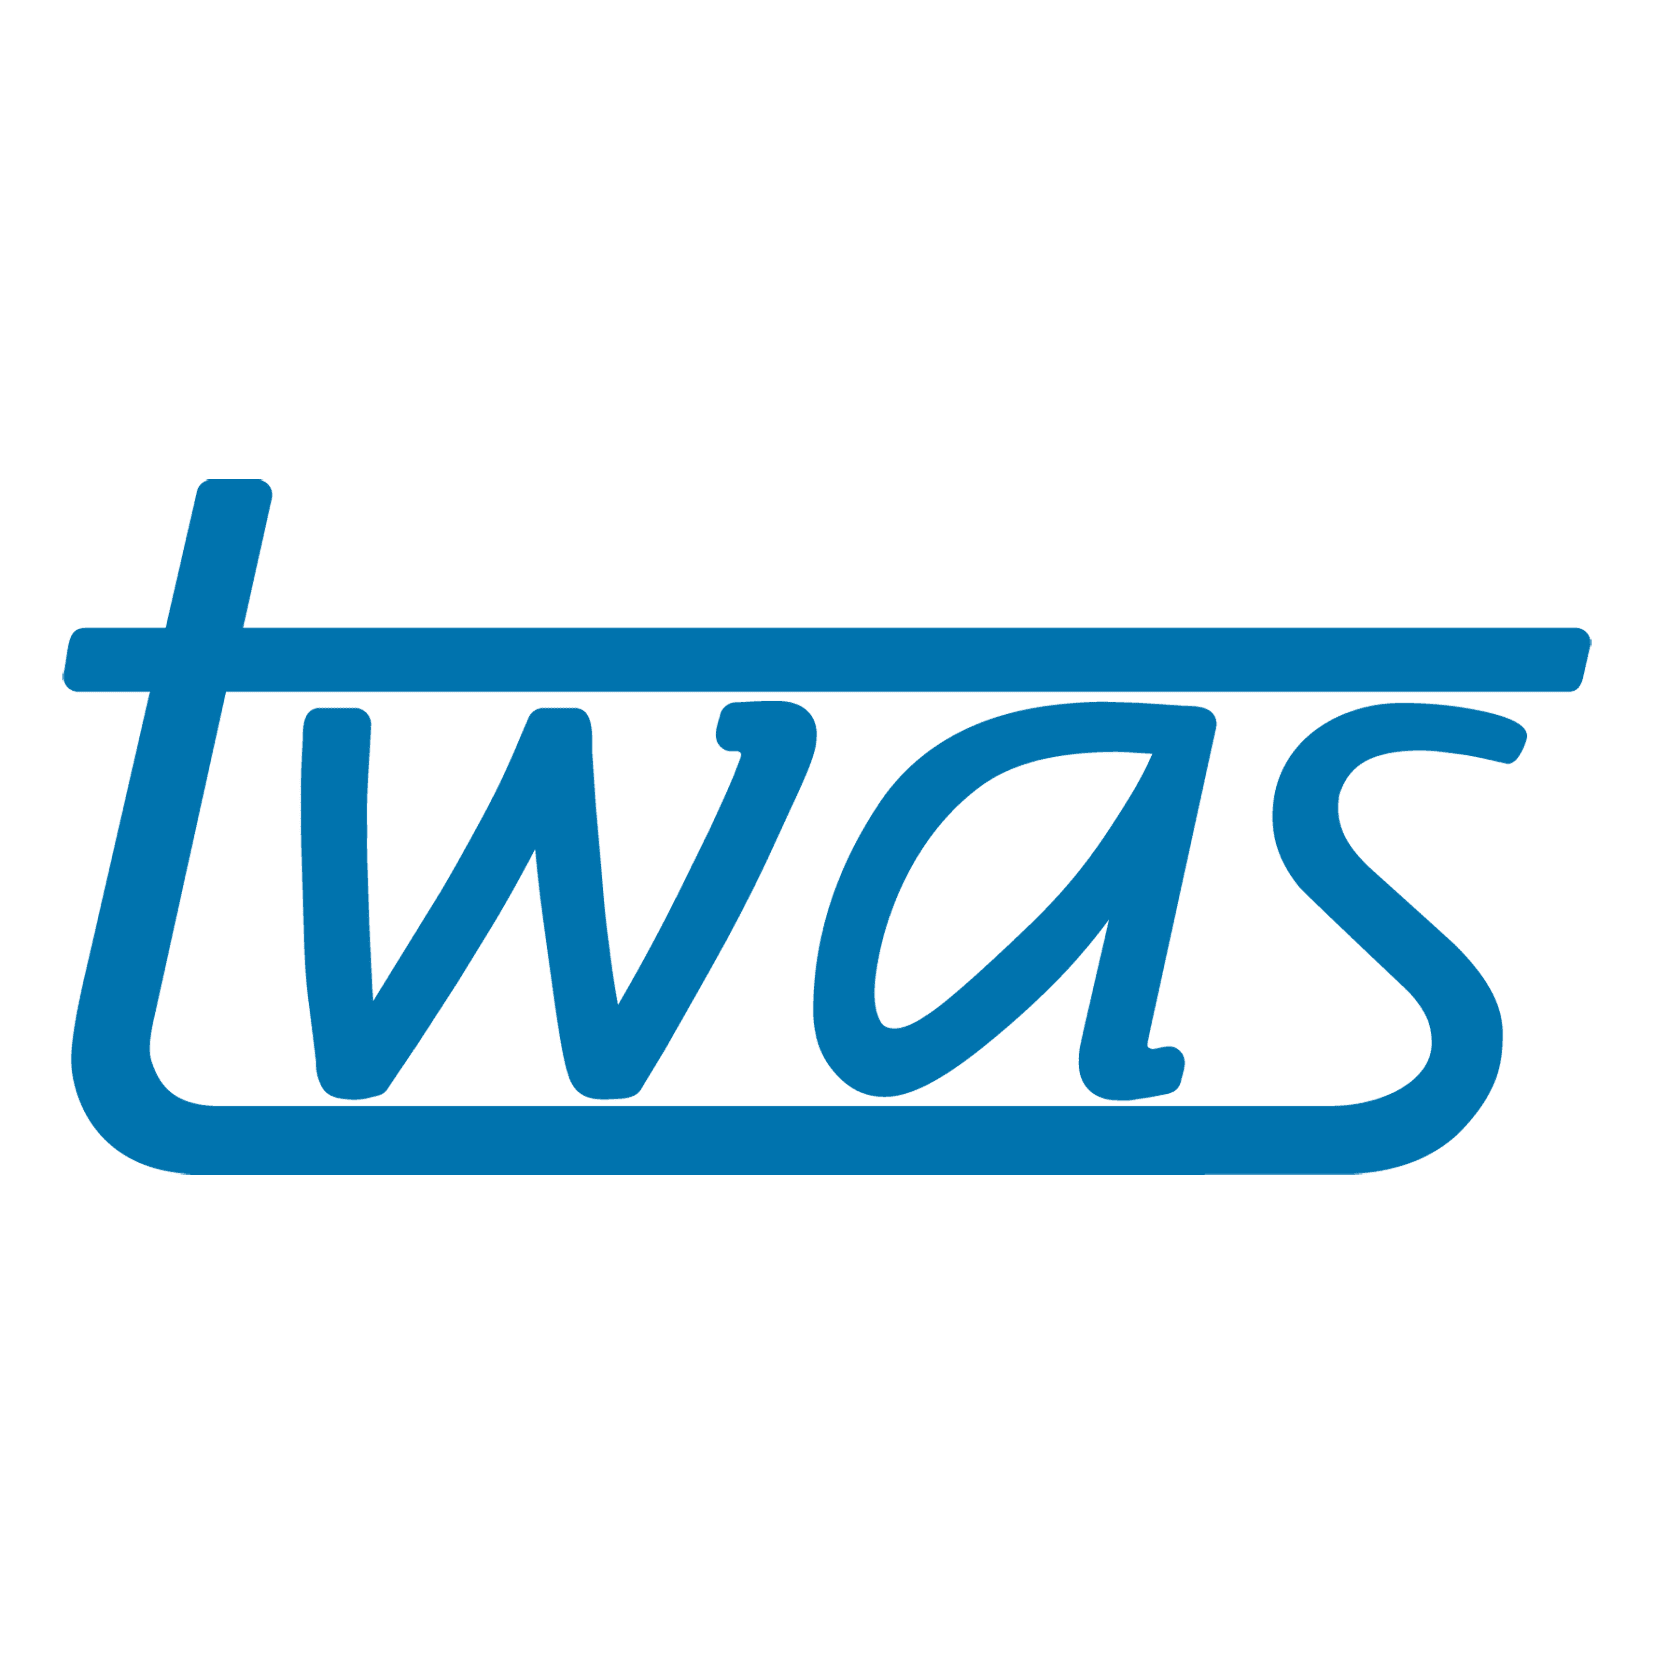 TWAS-ICCBS Postgraduate Fellowship Programme 2023 for young scientists from developing countries